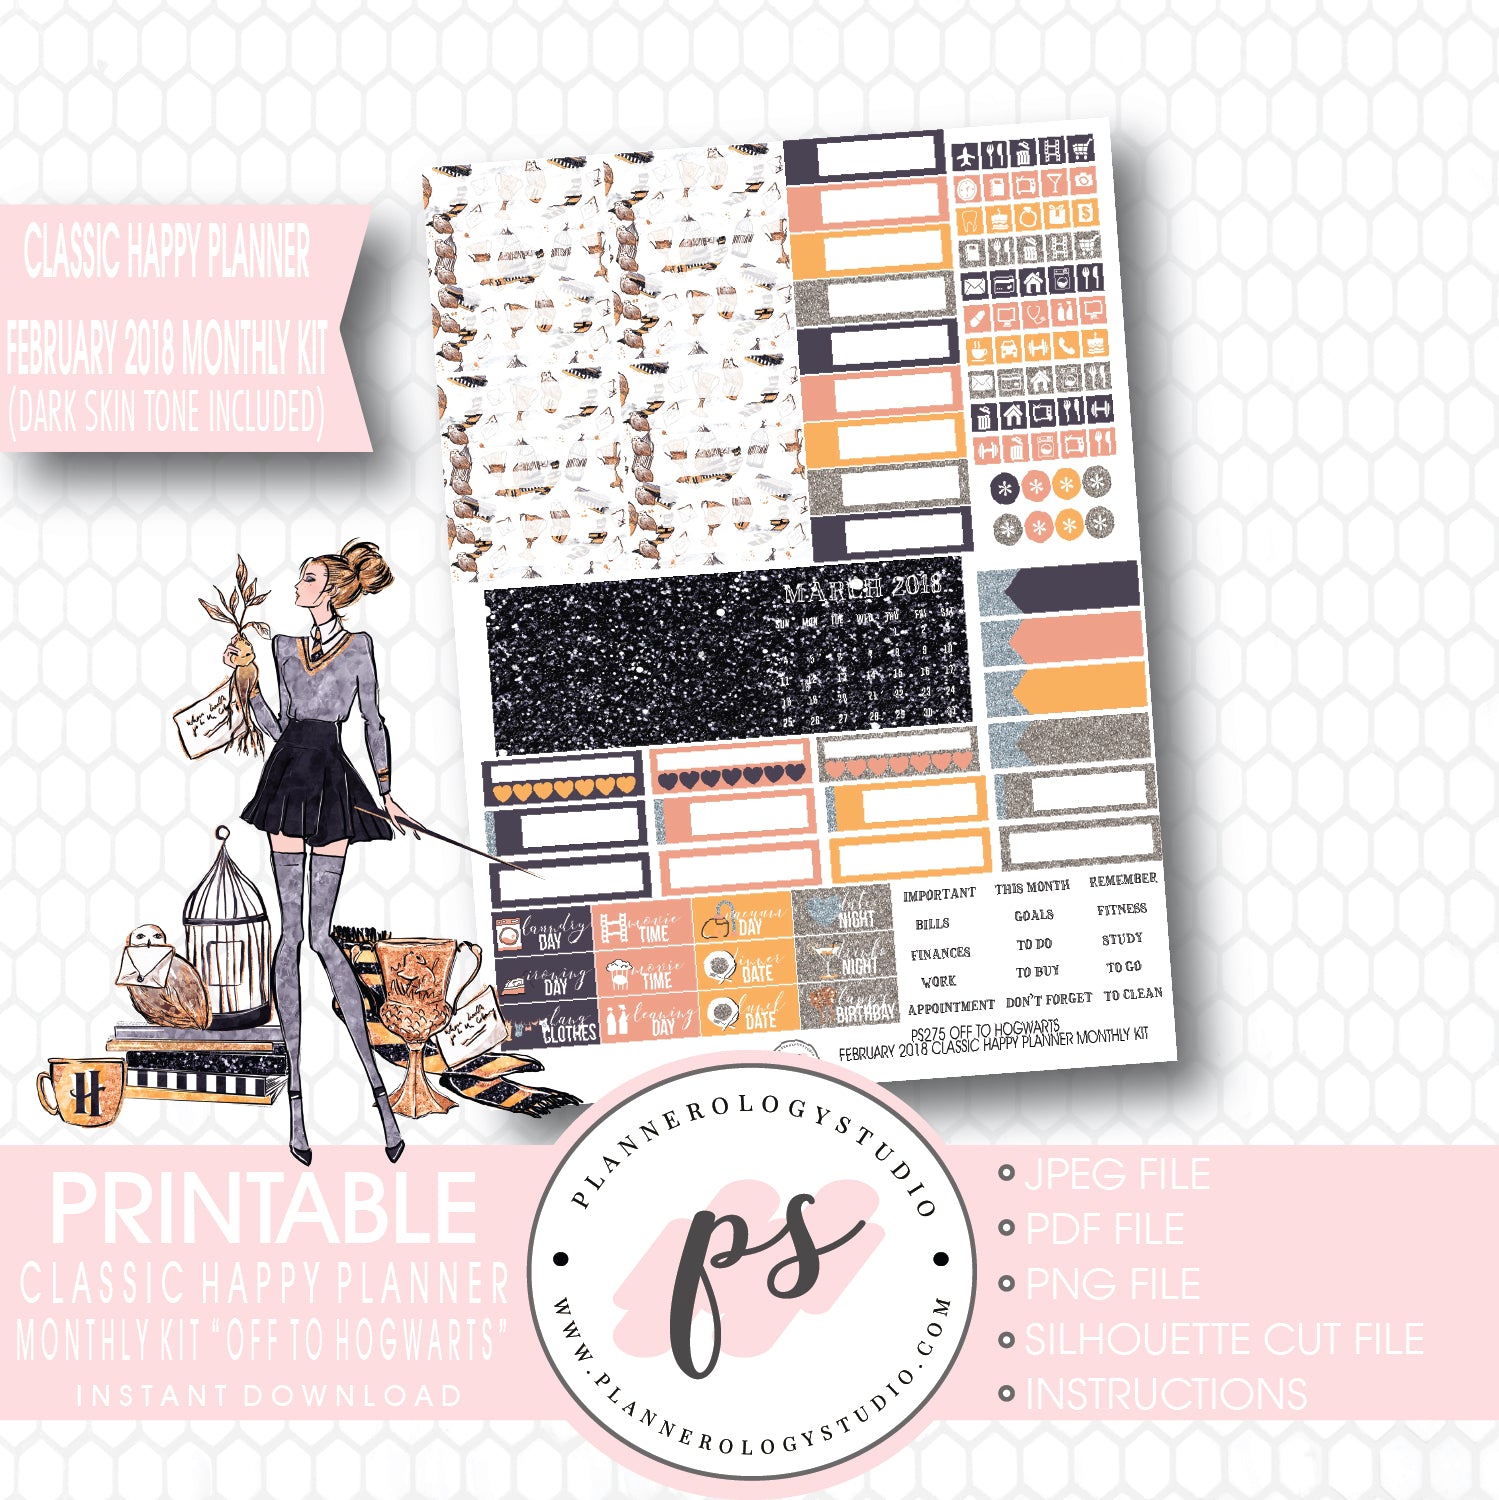 Off to Hogwarts (Harry Potter Theme) February 2018 Monthly View Kit Printable Planner Stickers (for use with Classic Happy Planner) (Dark & Light Skin Tone) - Plannerologystudio